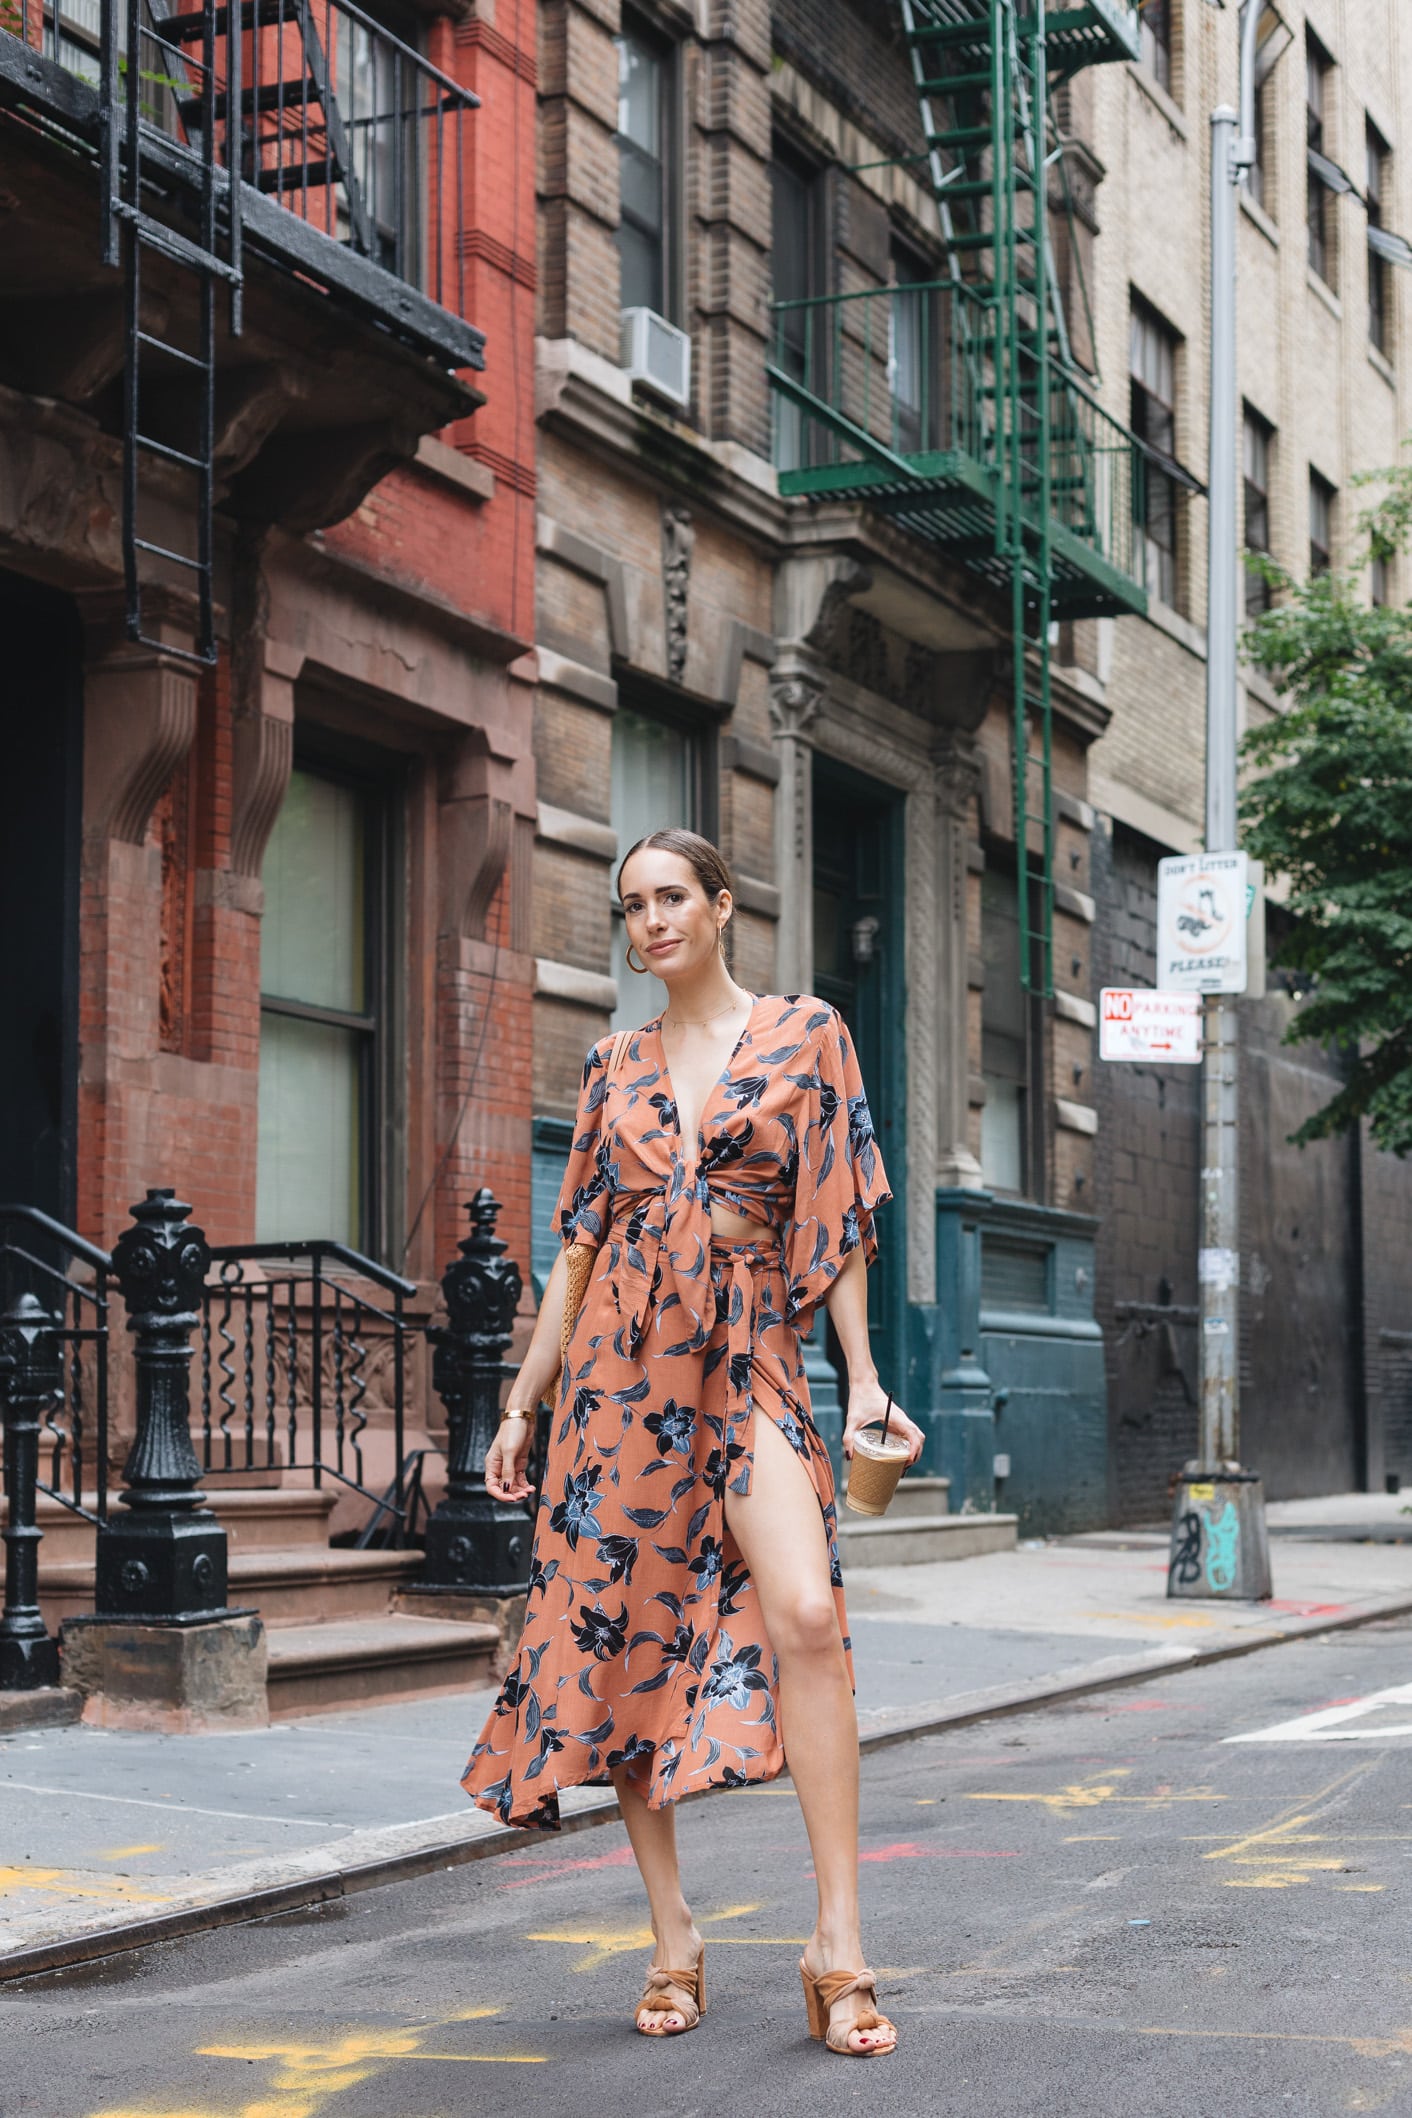 Louise wearing Faithfull the brand fall florals dress in New York